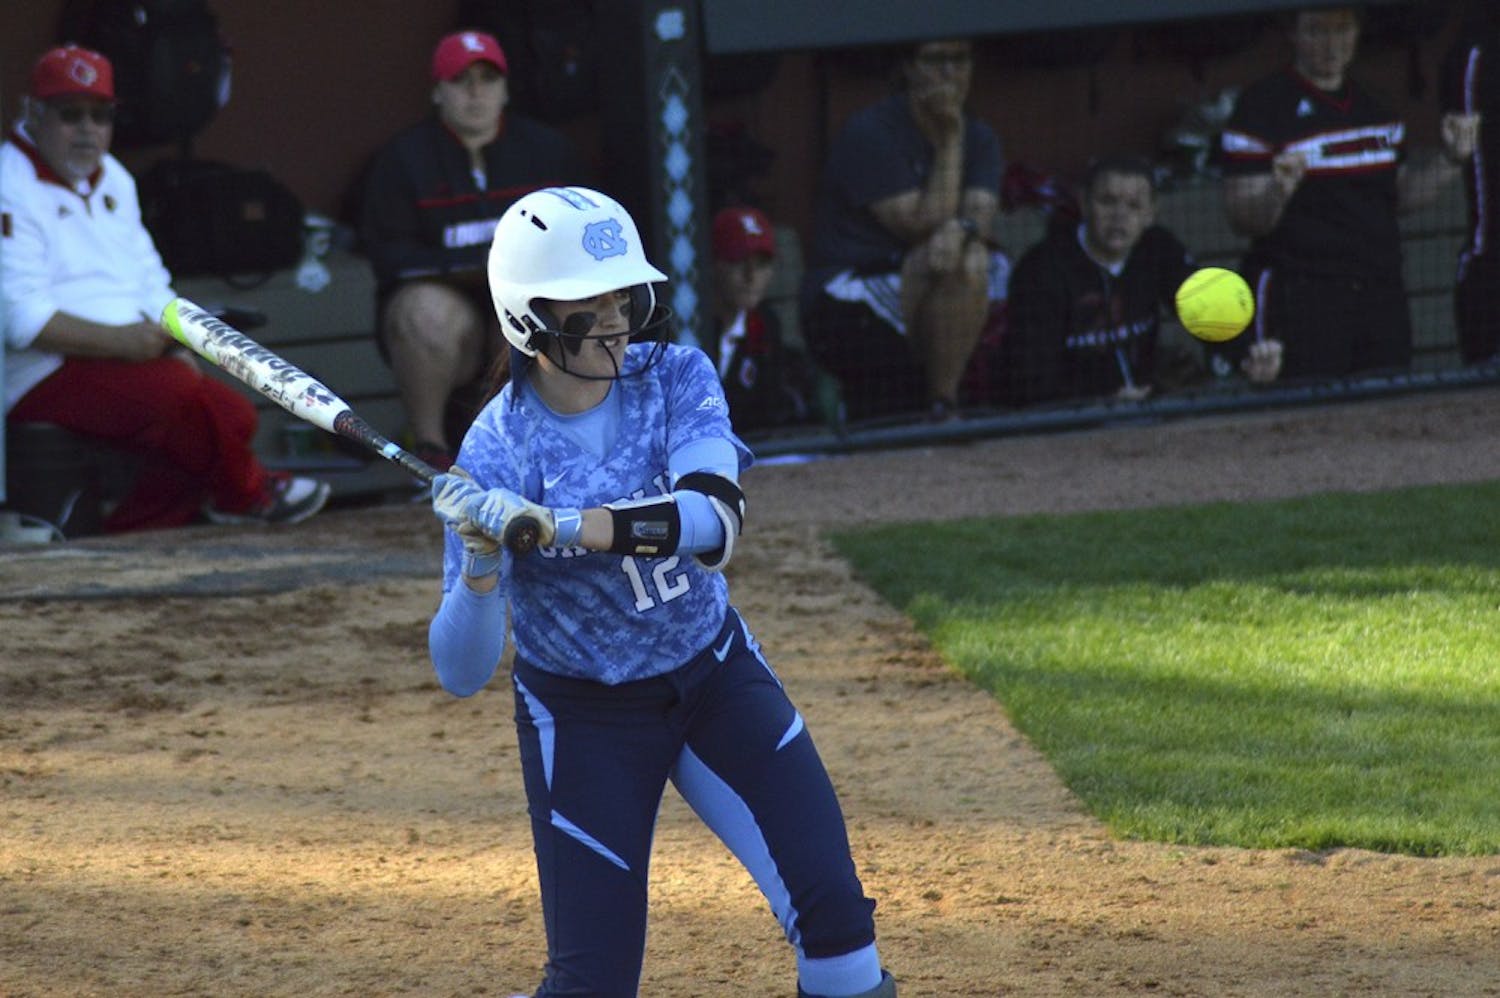 Shortstop Kristen Brown swings at the ball during UNC's game against Louisville on Saturday.